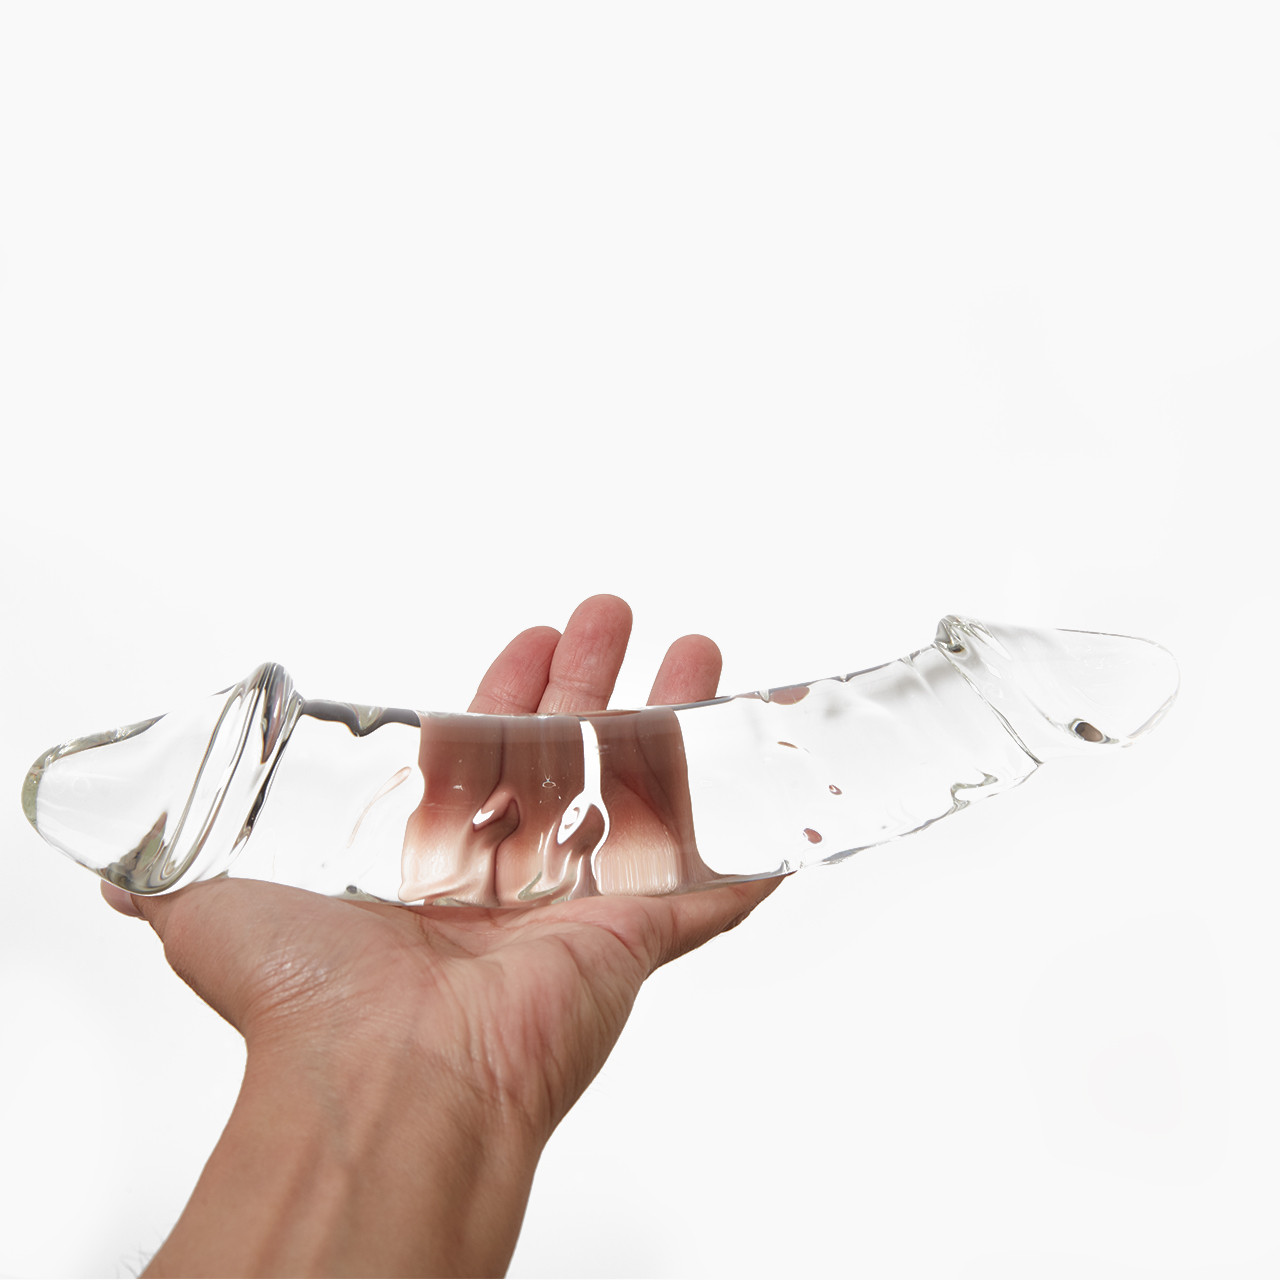 'Glas 10.5" Girthy Double Dong', a transparent double-ended glass massager held in a hand